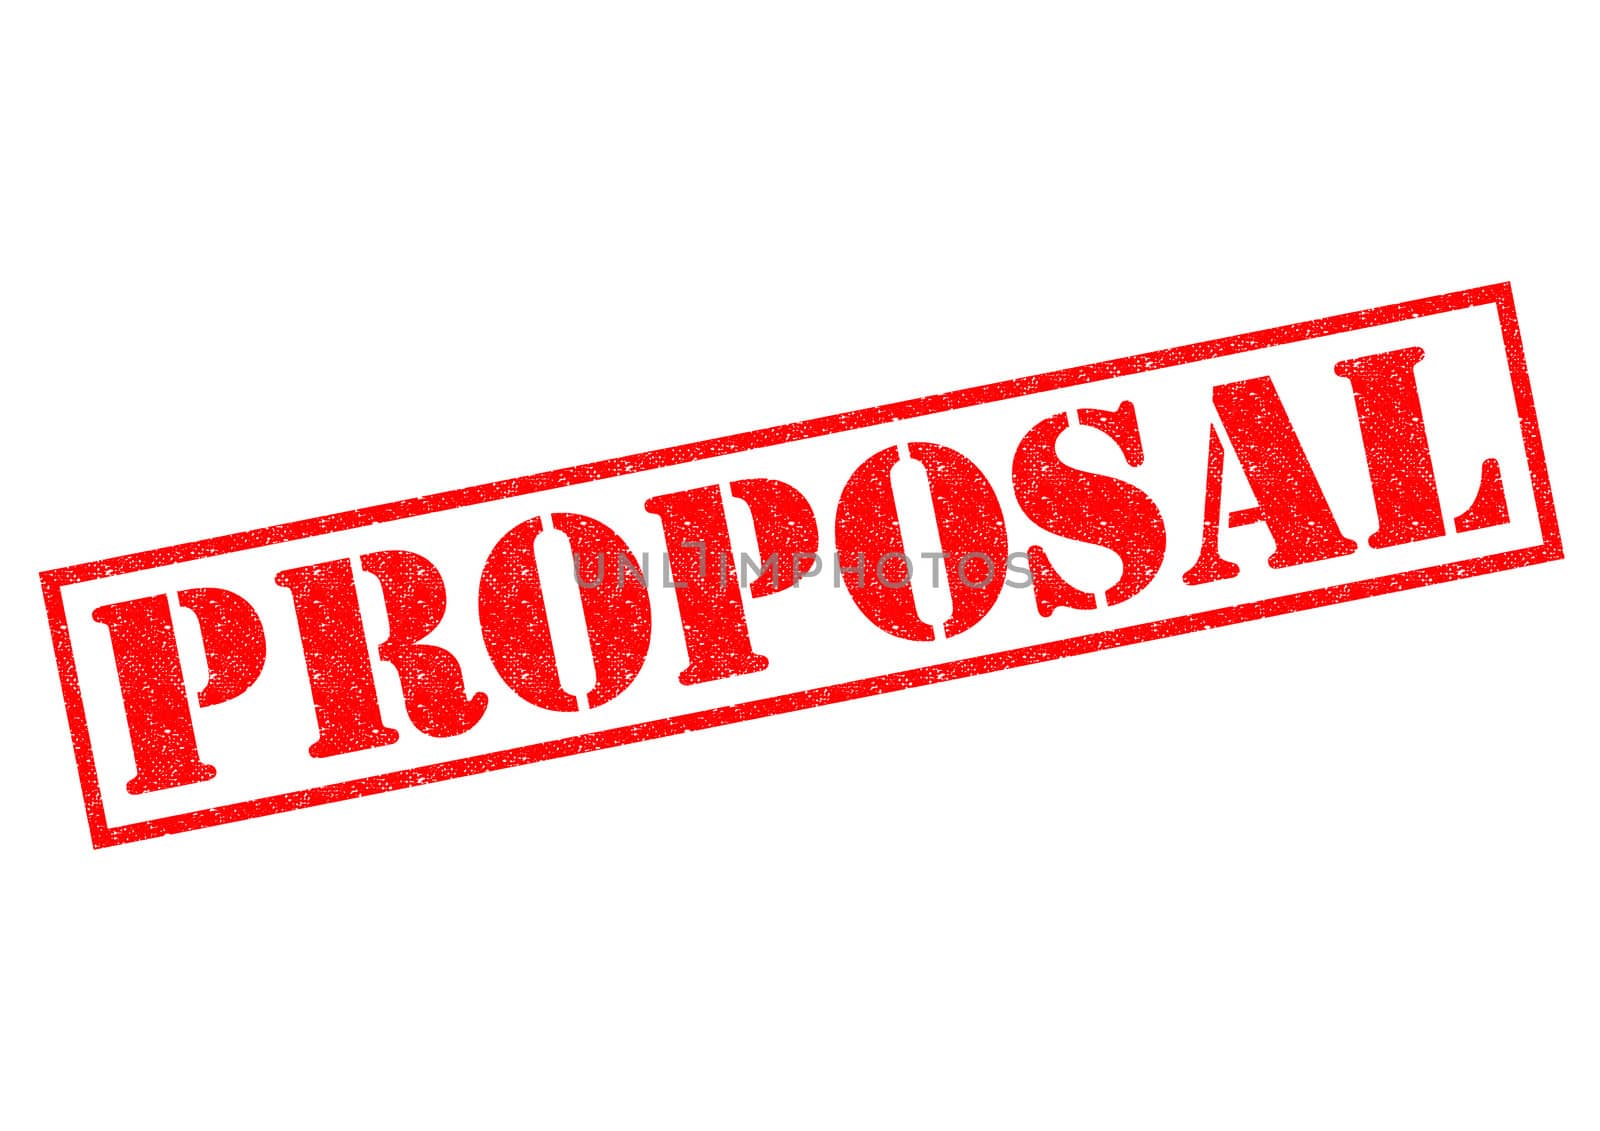 PROPOSAL red Rubber Stamp over a white background.